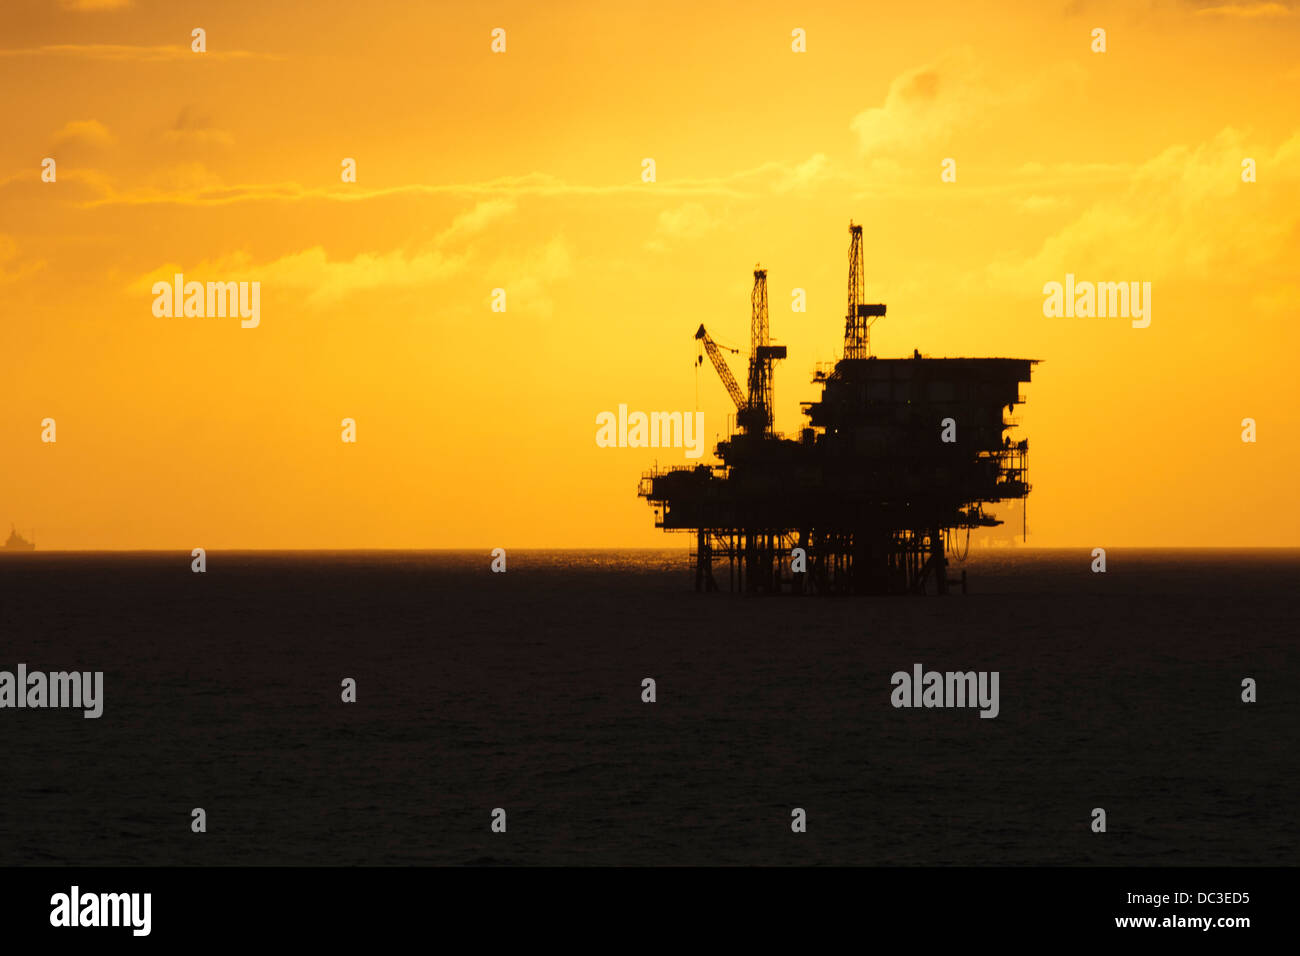 Silhouette of an offshore oil rig far on the horizon at sunset/sunrise time. Stock Photo